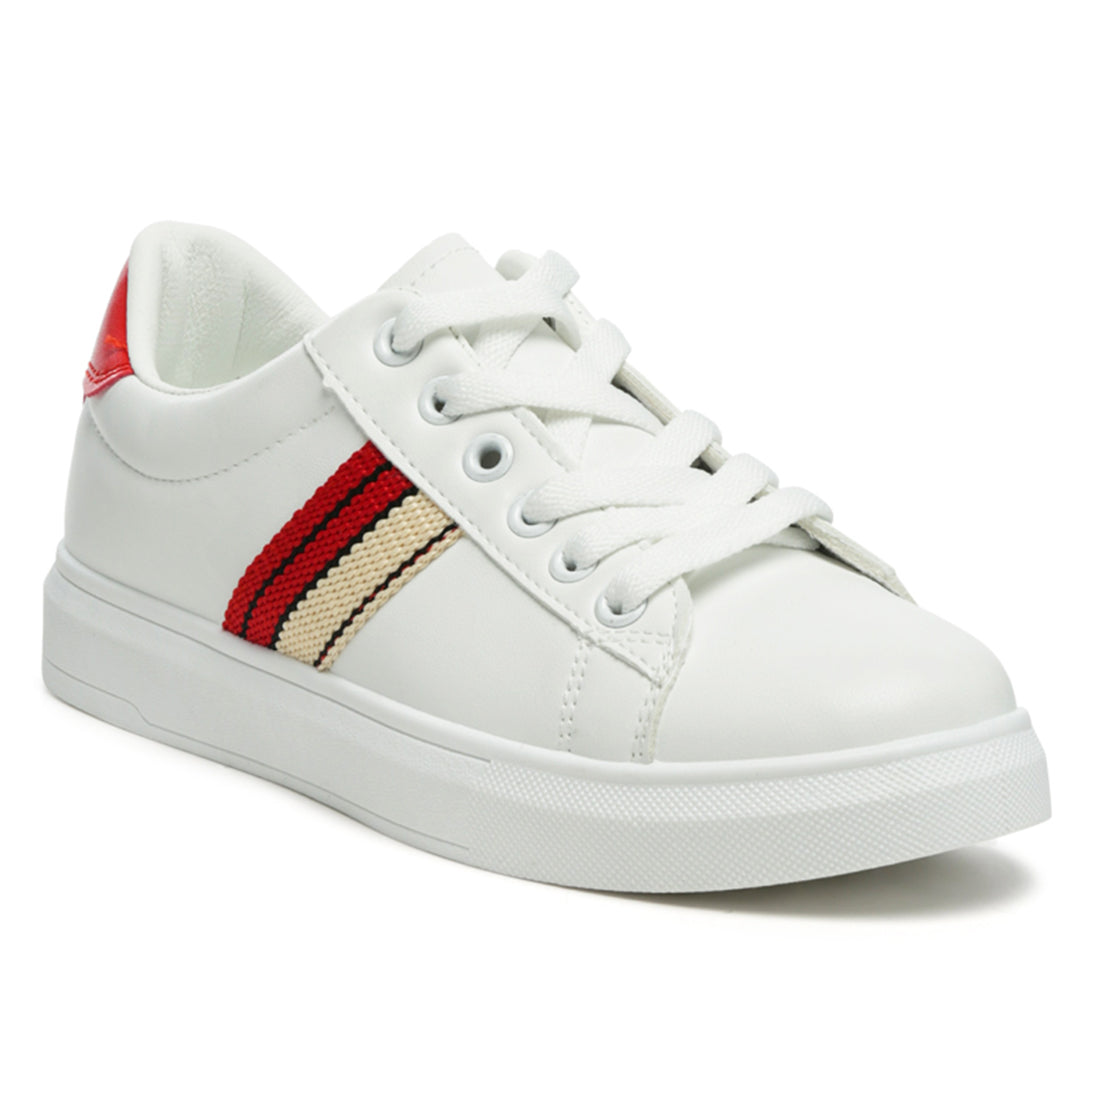 Evening Stroll Casual Active Sneaker in Red Stripes - Red